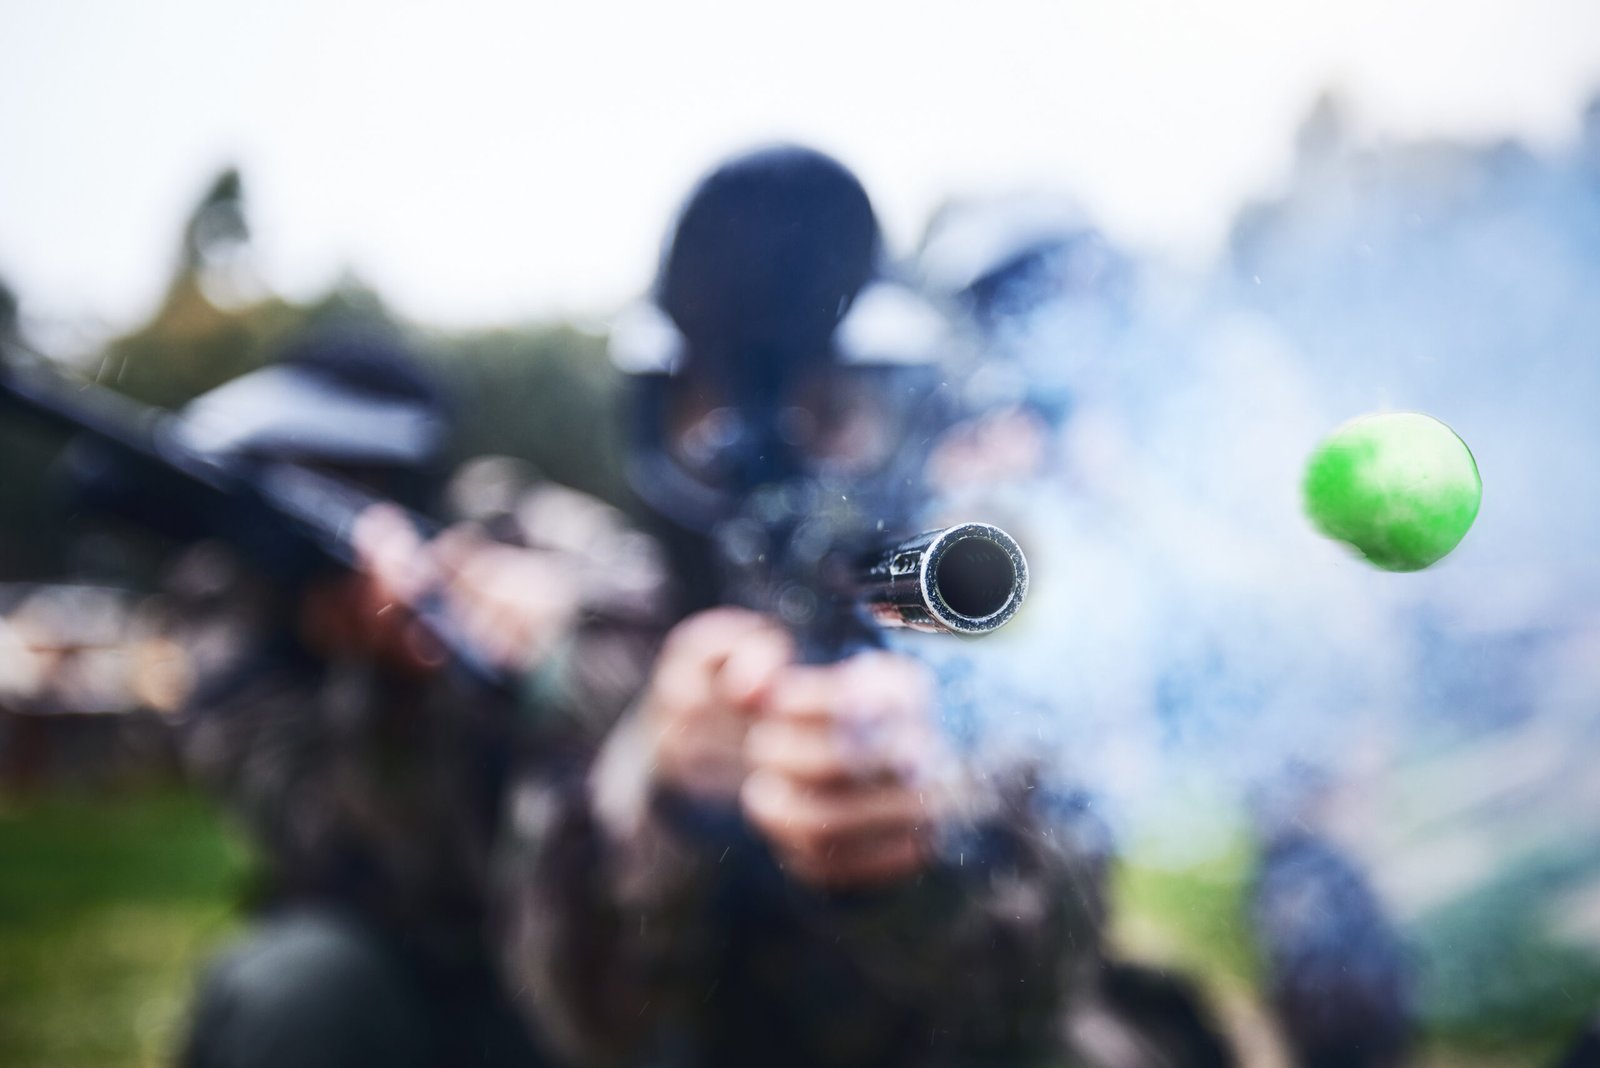 Paintball, shooting and person with a gun during a game, competition or match on a field. Fire, smoke and tool in motion for attack, battle and aim with a weapon during an outdoor cardio sport.